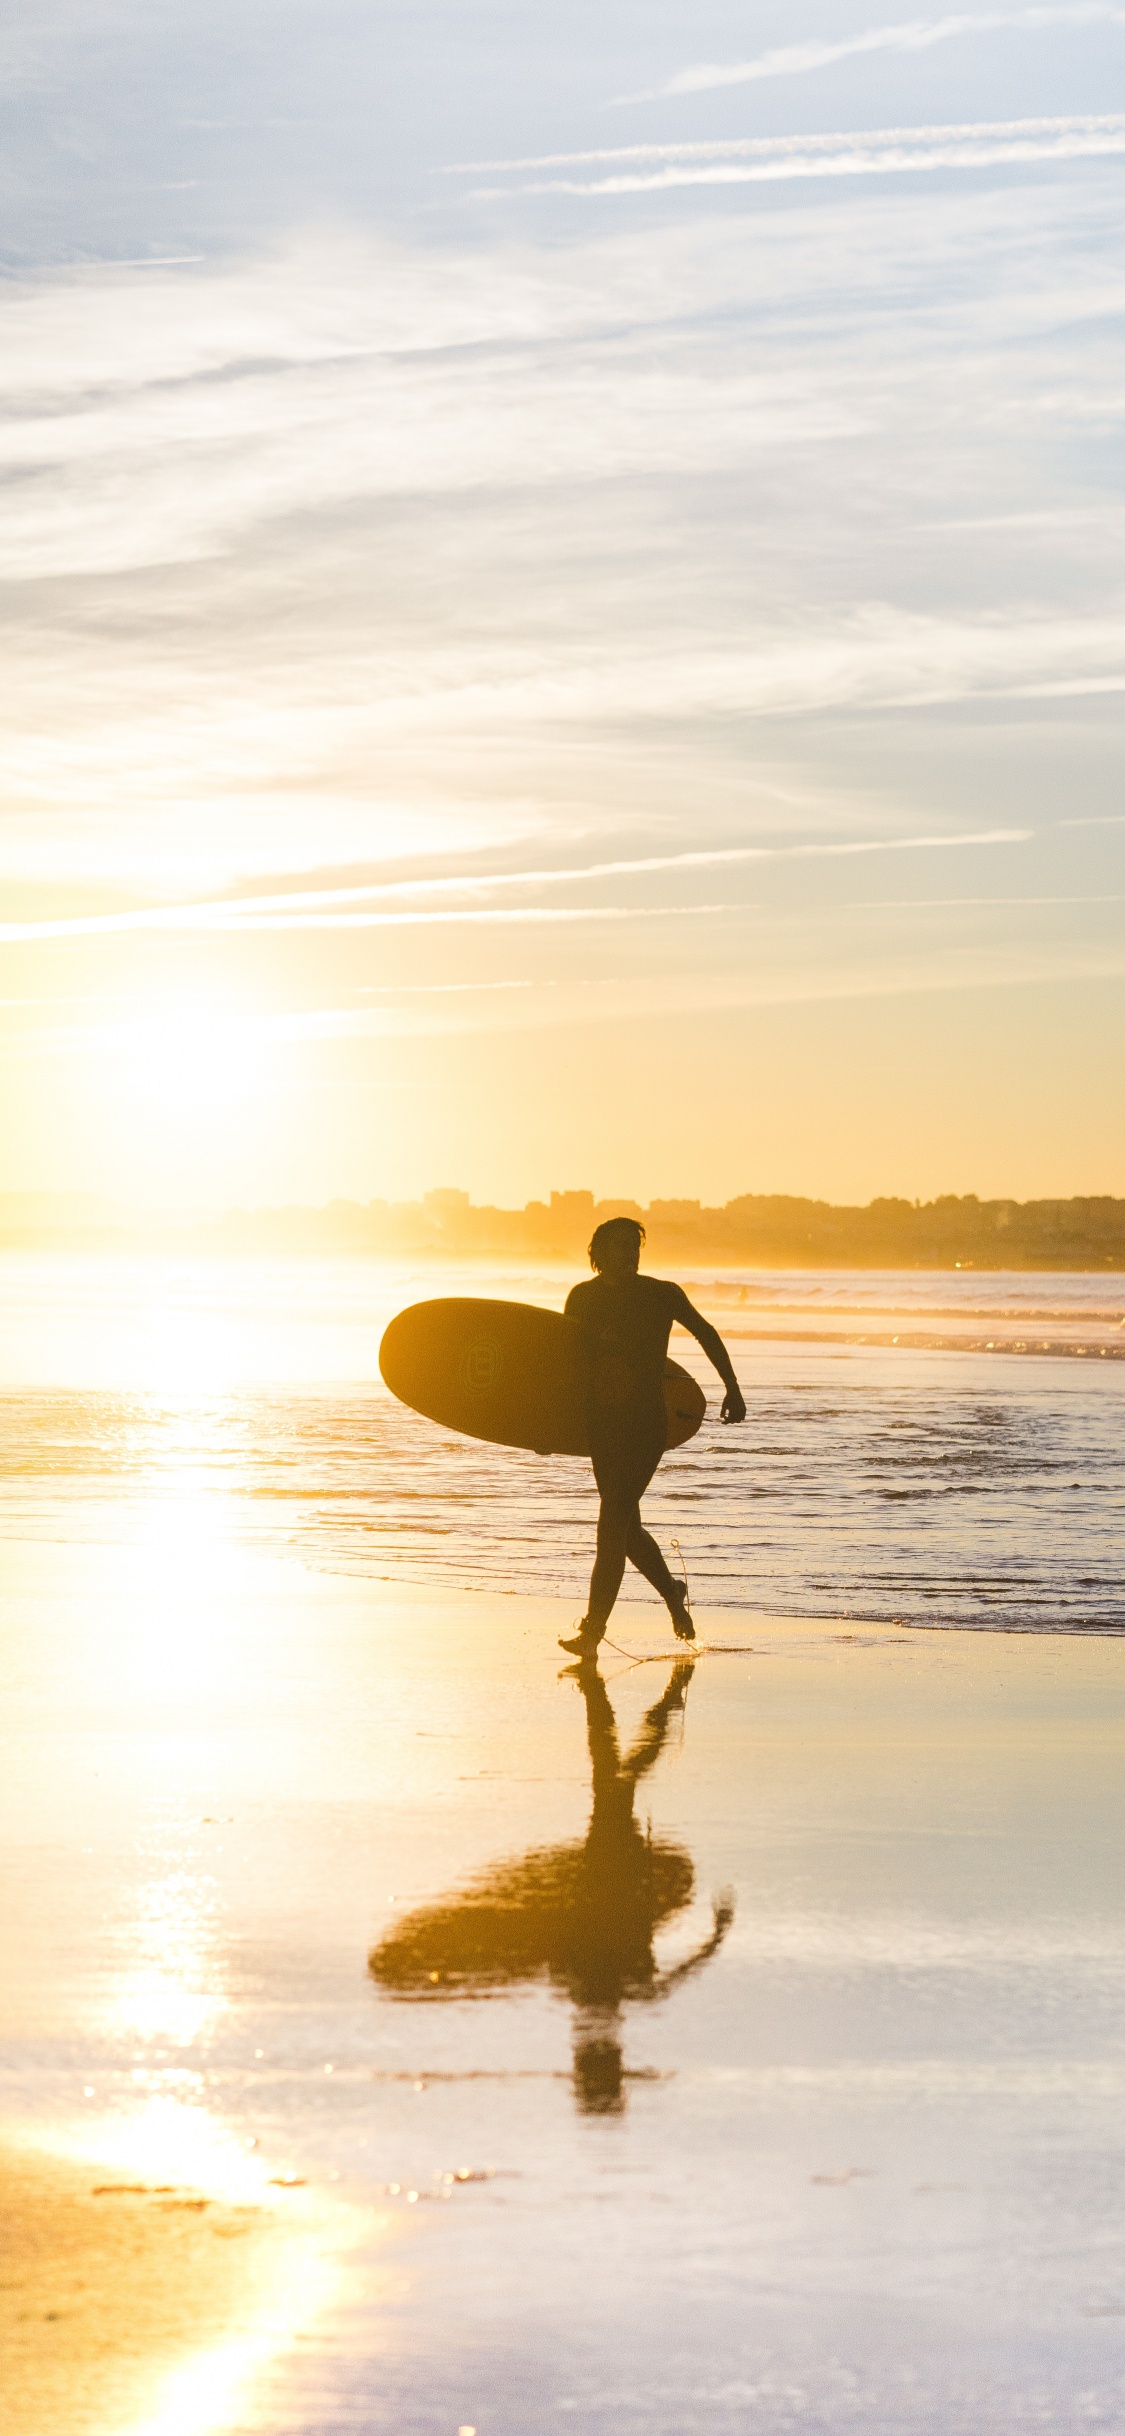 Man in Black Shorts Holding Surfboard Walking on Seashore During Sunset. Wallpaper in 1125x2436 Resolution